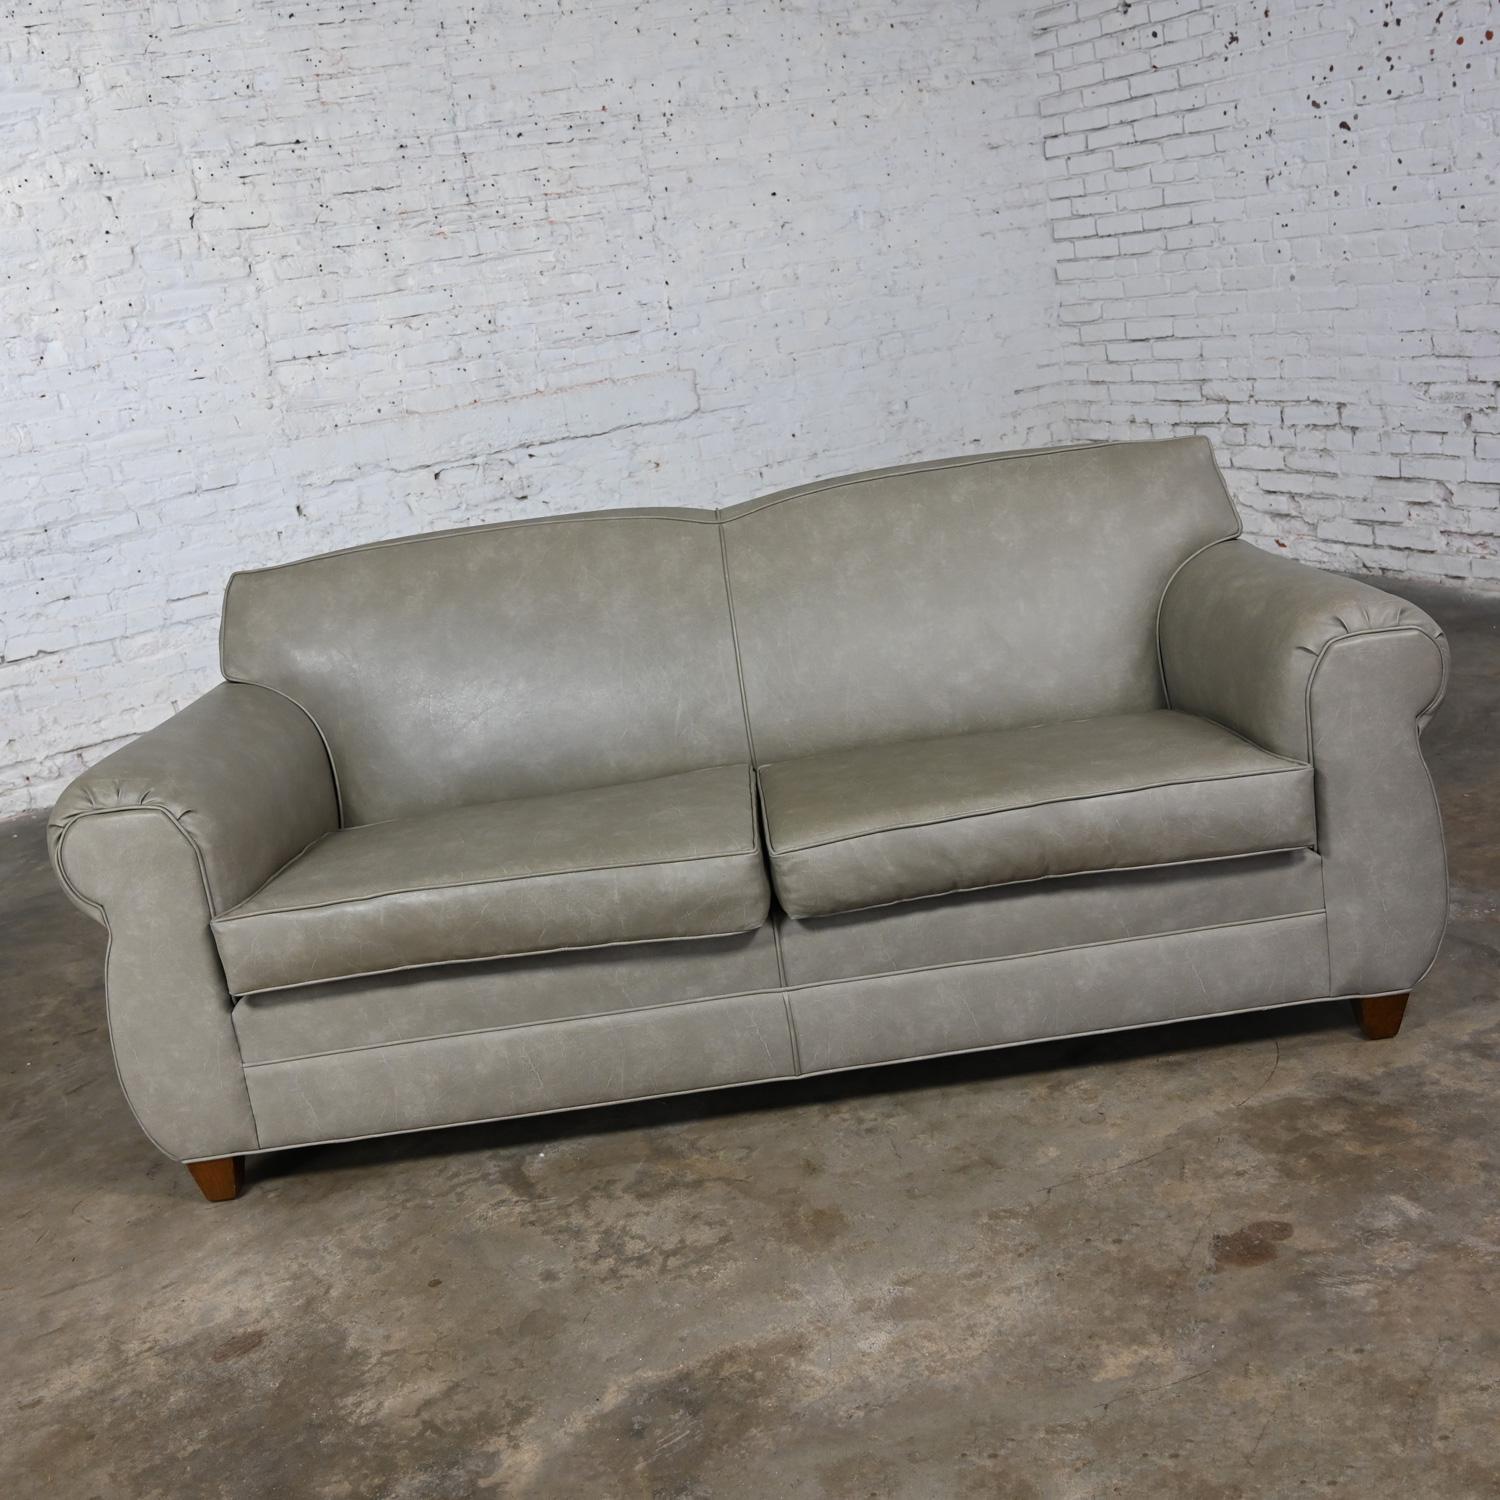 Handsome vintage taupe gray faux leather upholstered Bridgewater style sofa with tight back, two loose seat cushions & square tapered wood feet. Beautiful condition, keeping in mind that this is vintage and not new so will have signs of use and